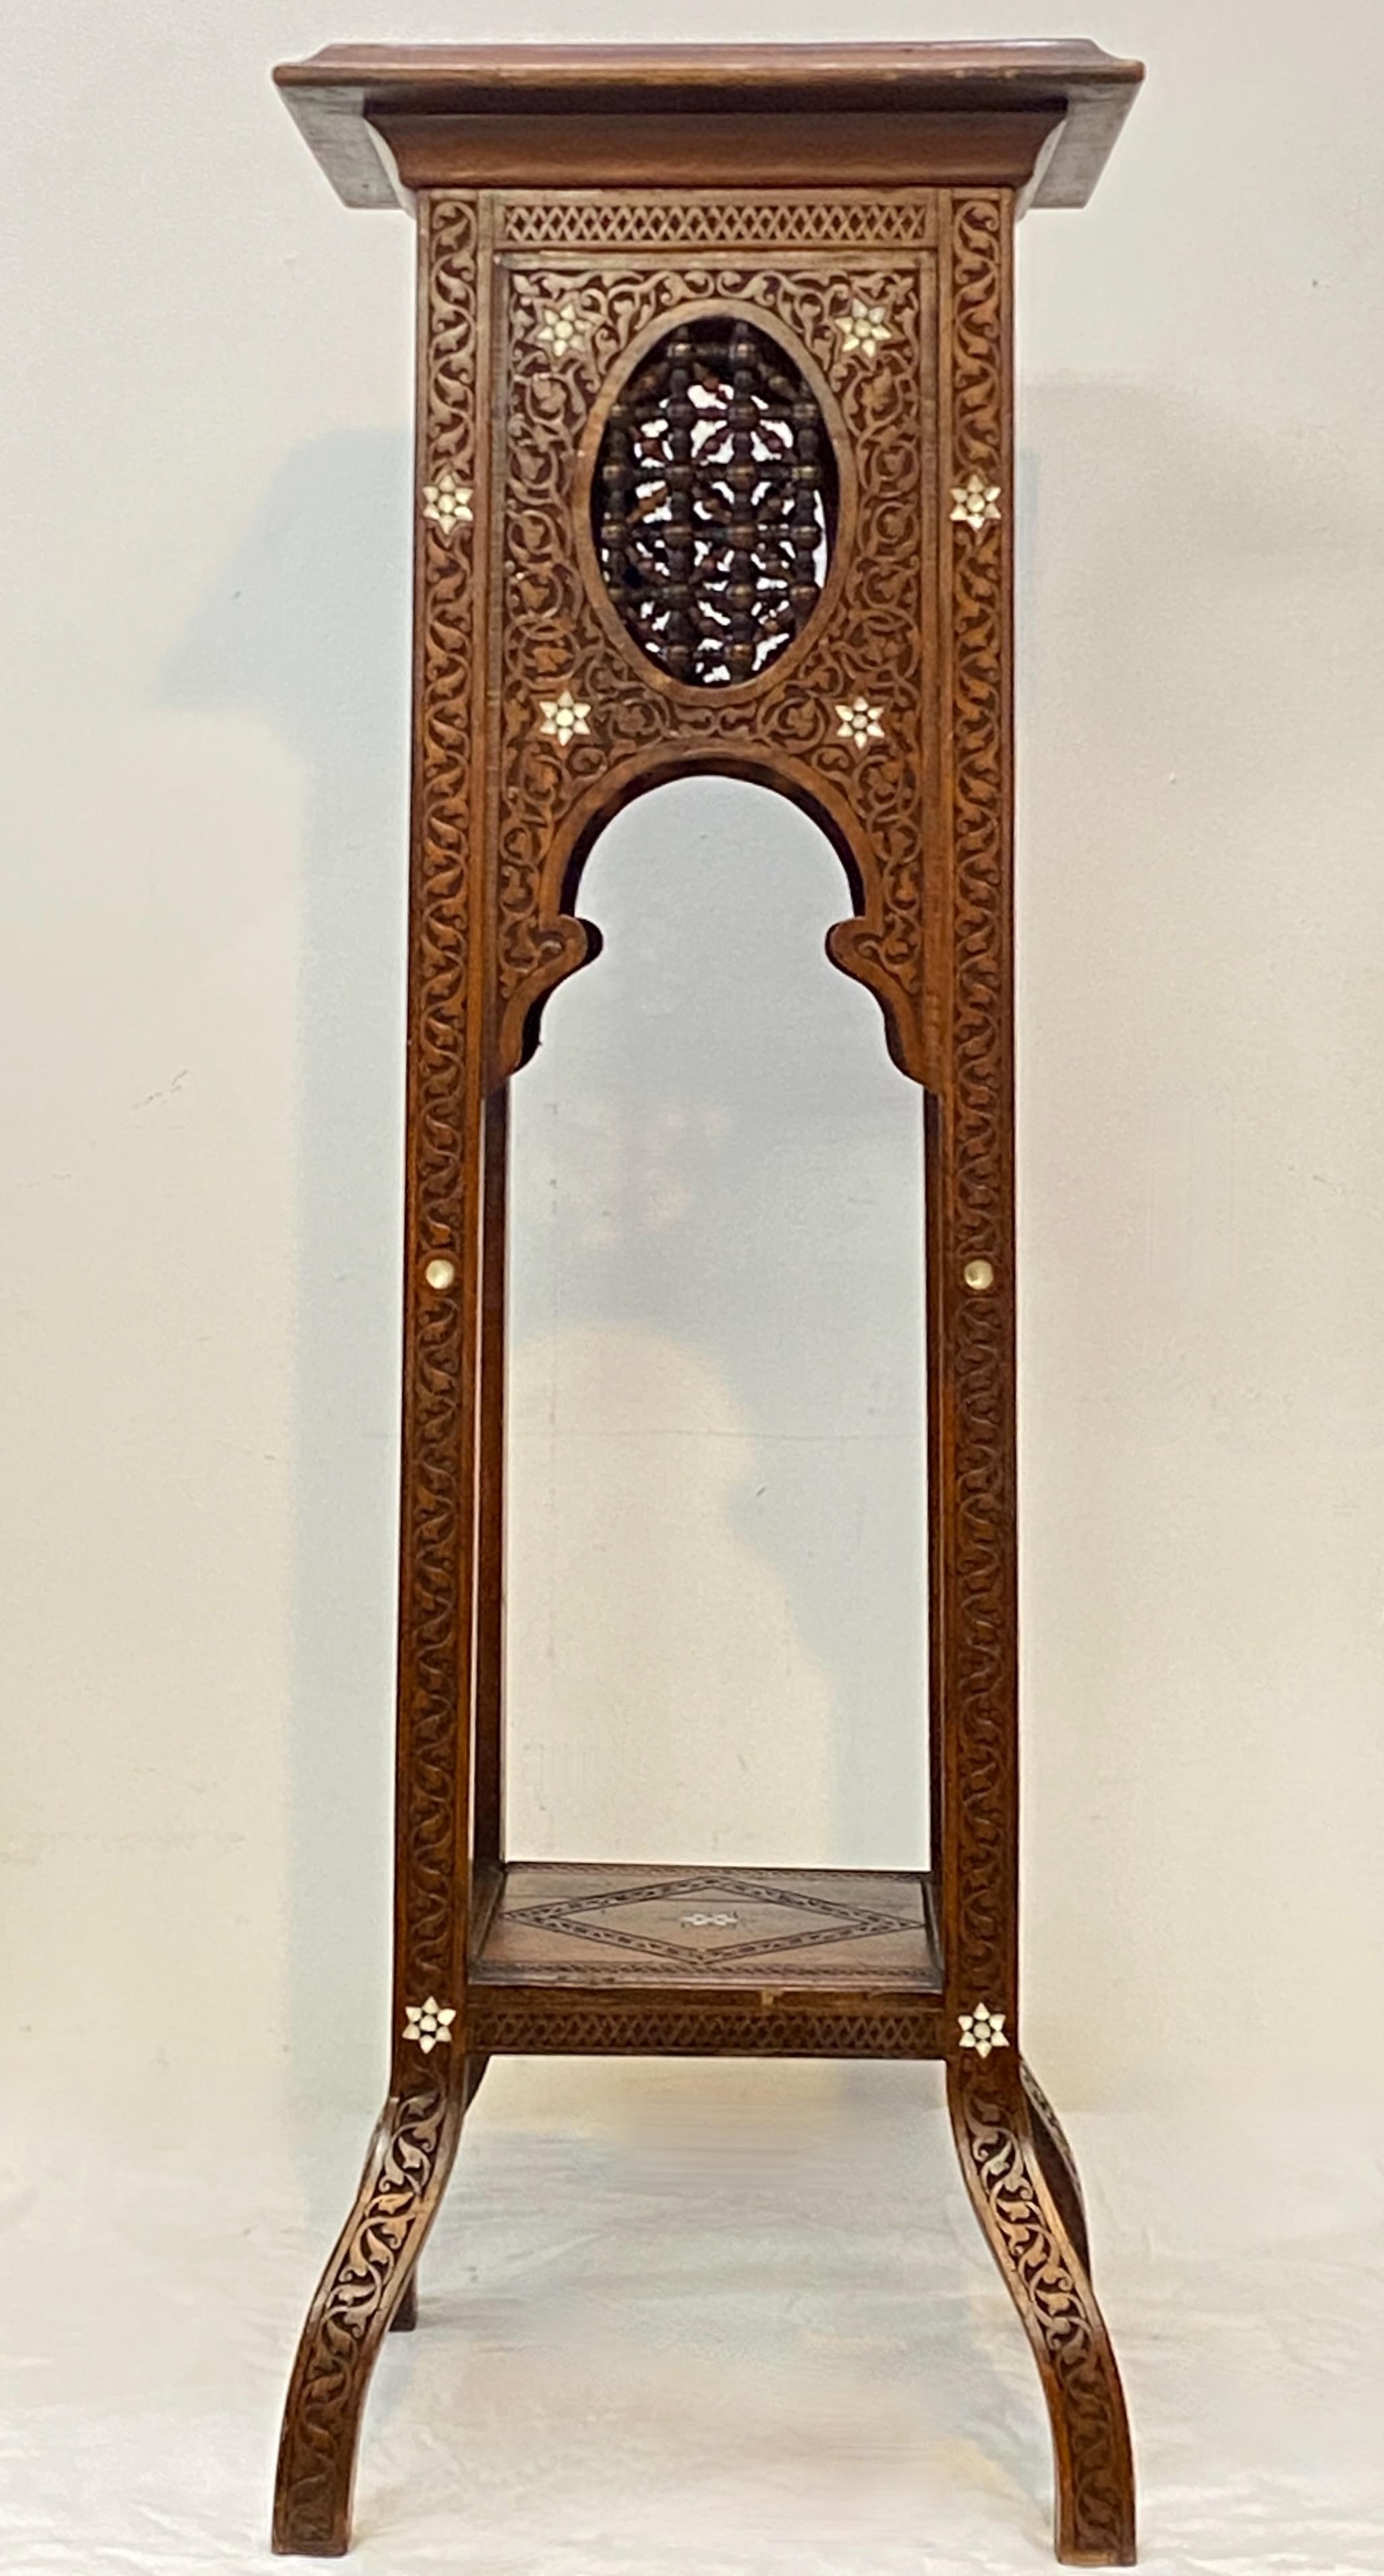 A carved walnut plant stand or pedestal with mother of pearl inlay detail.
Late 19th / early 20th century.
In very good antique condition, having an age crack on the lower shelf.

